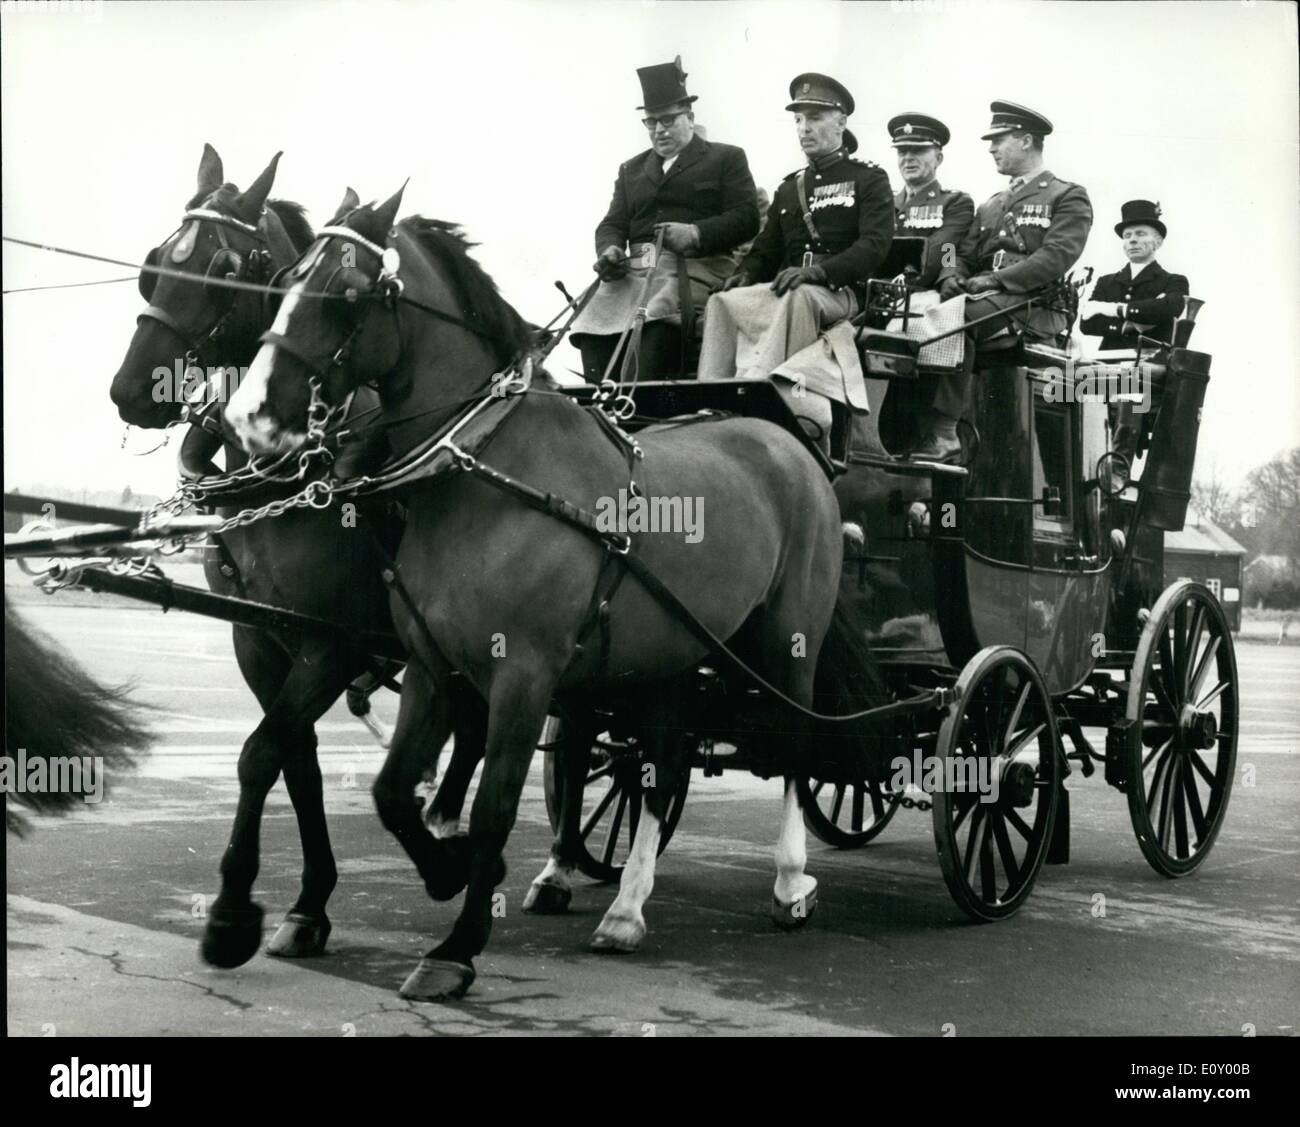 Feb. 02, 1968 - Commandant Leaves By Coach And Four. Parade To Mark Retirement Of Brig. L.J. Aspland: When Brigadier Lindsey Aspland, commandant of the Royal Corps of Transport Training Centre, retired today, he was driven away from the barracks by the regimental coach and four, escorted by thirty mounted soldiers. A parade in honour of the Brigadier was held on the main parade ground at the Royal Corps of Transport Training Centre, Queen Elizabeth Barracks, Crookham, near Aldershot Stock Photo